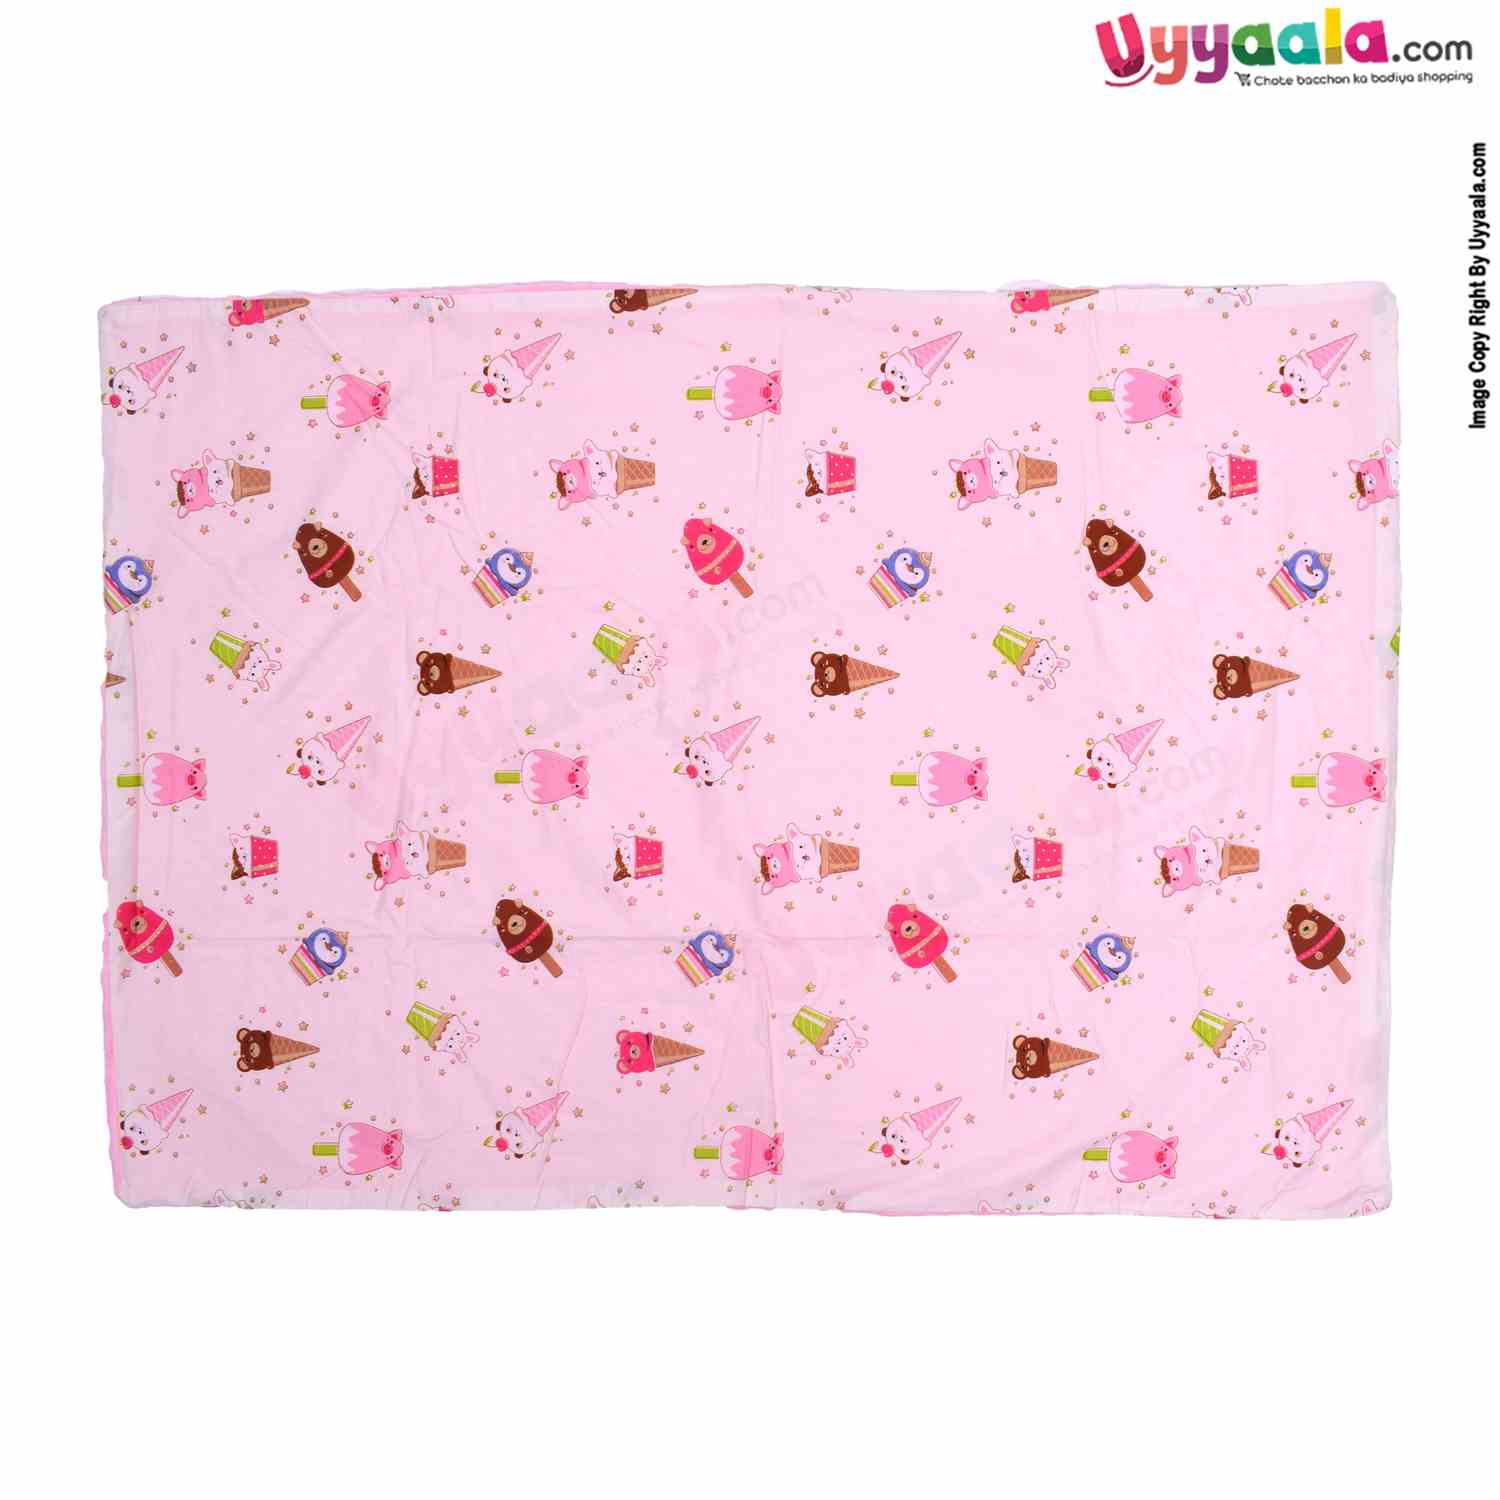 Double Layered Blanket One Side Fur & Another Side Cotton with Ice Creams Print for Babies 0-24m Age, Size (106*75cm) -Light Pink